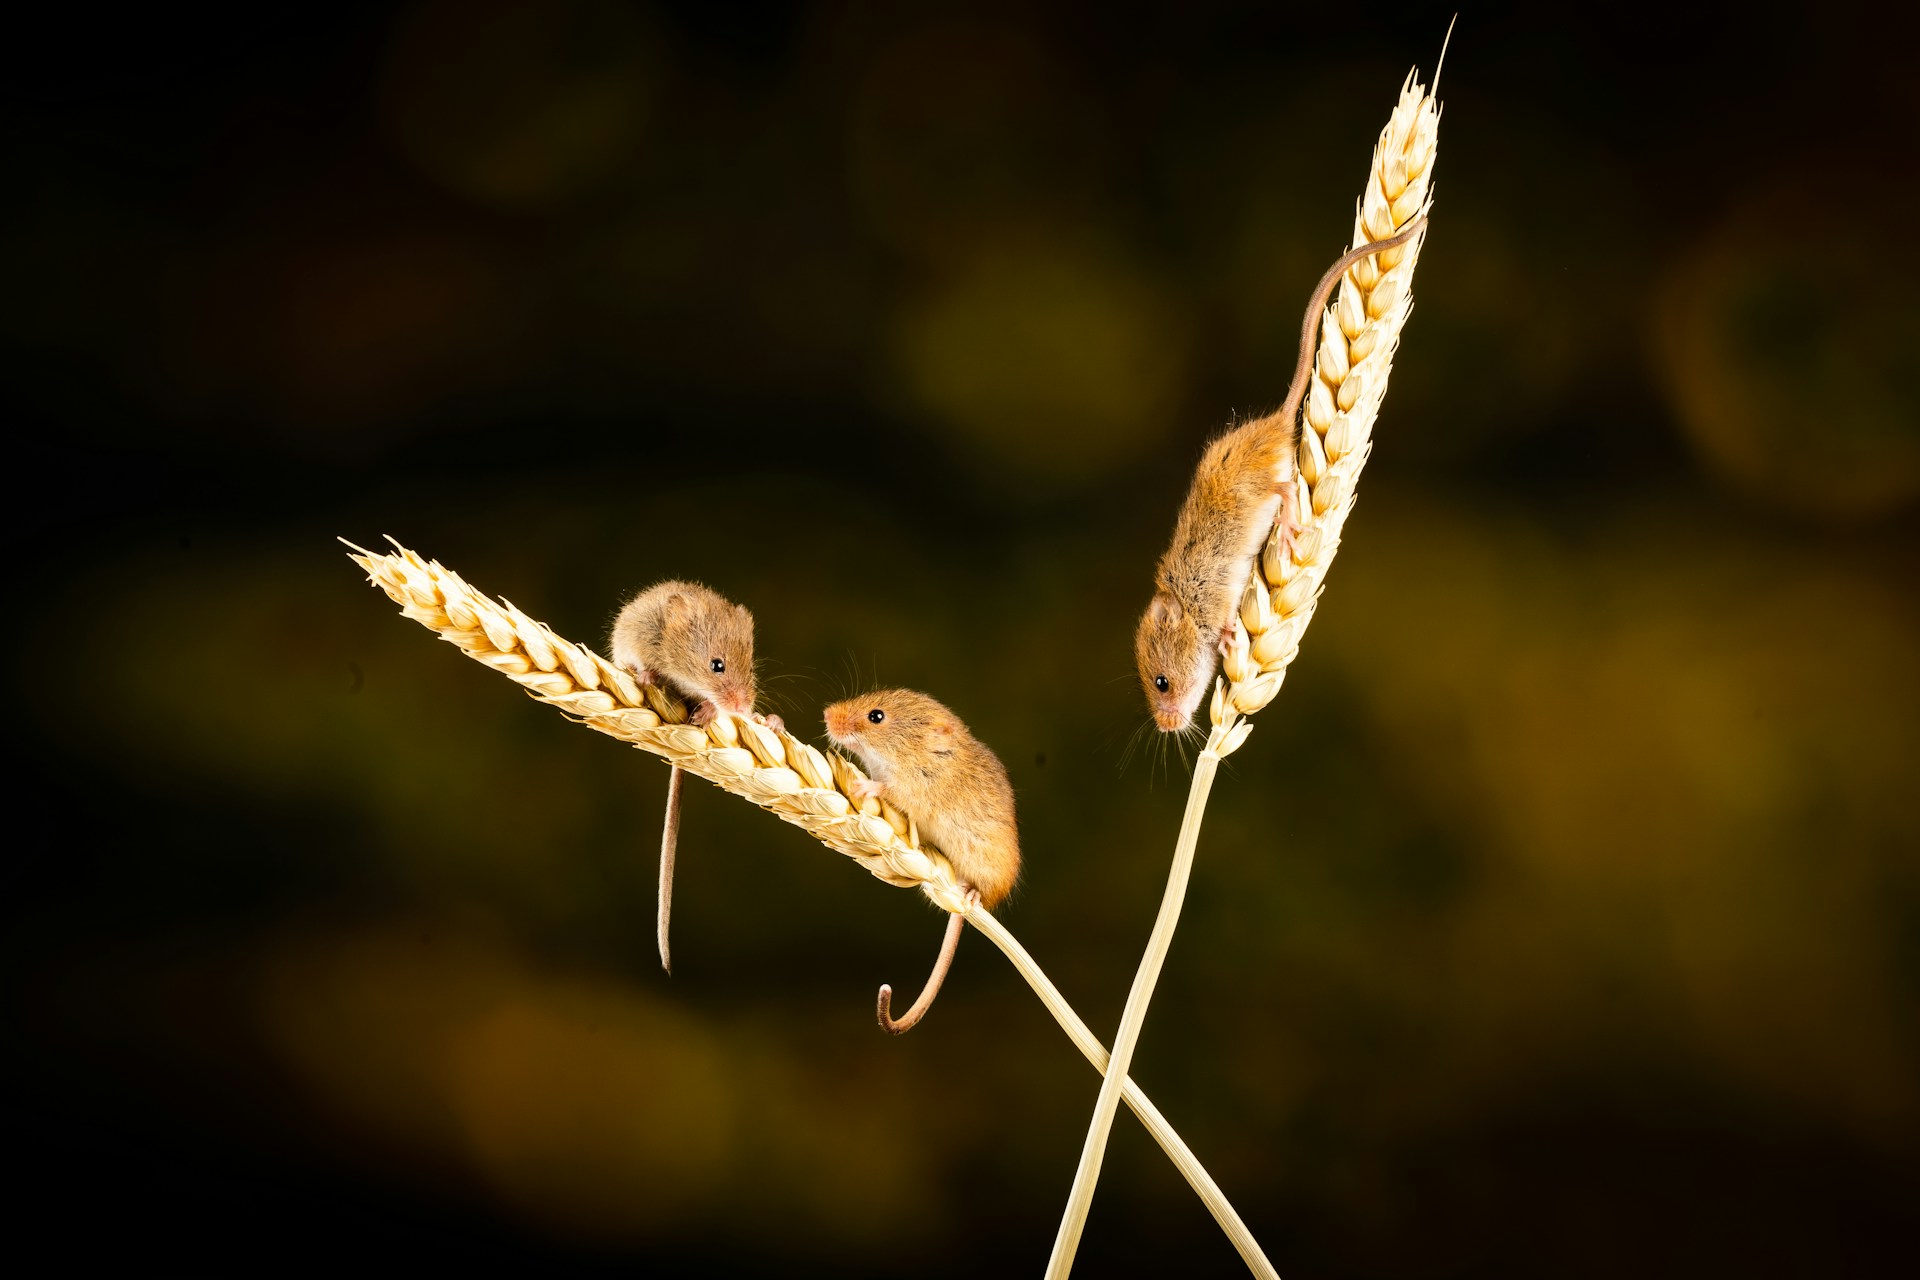 Three mice on wheat stalks against a dark background, experiencing the effects of oxytocin.